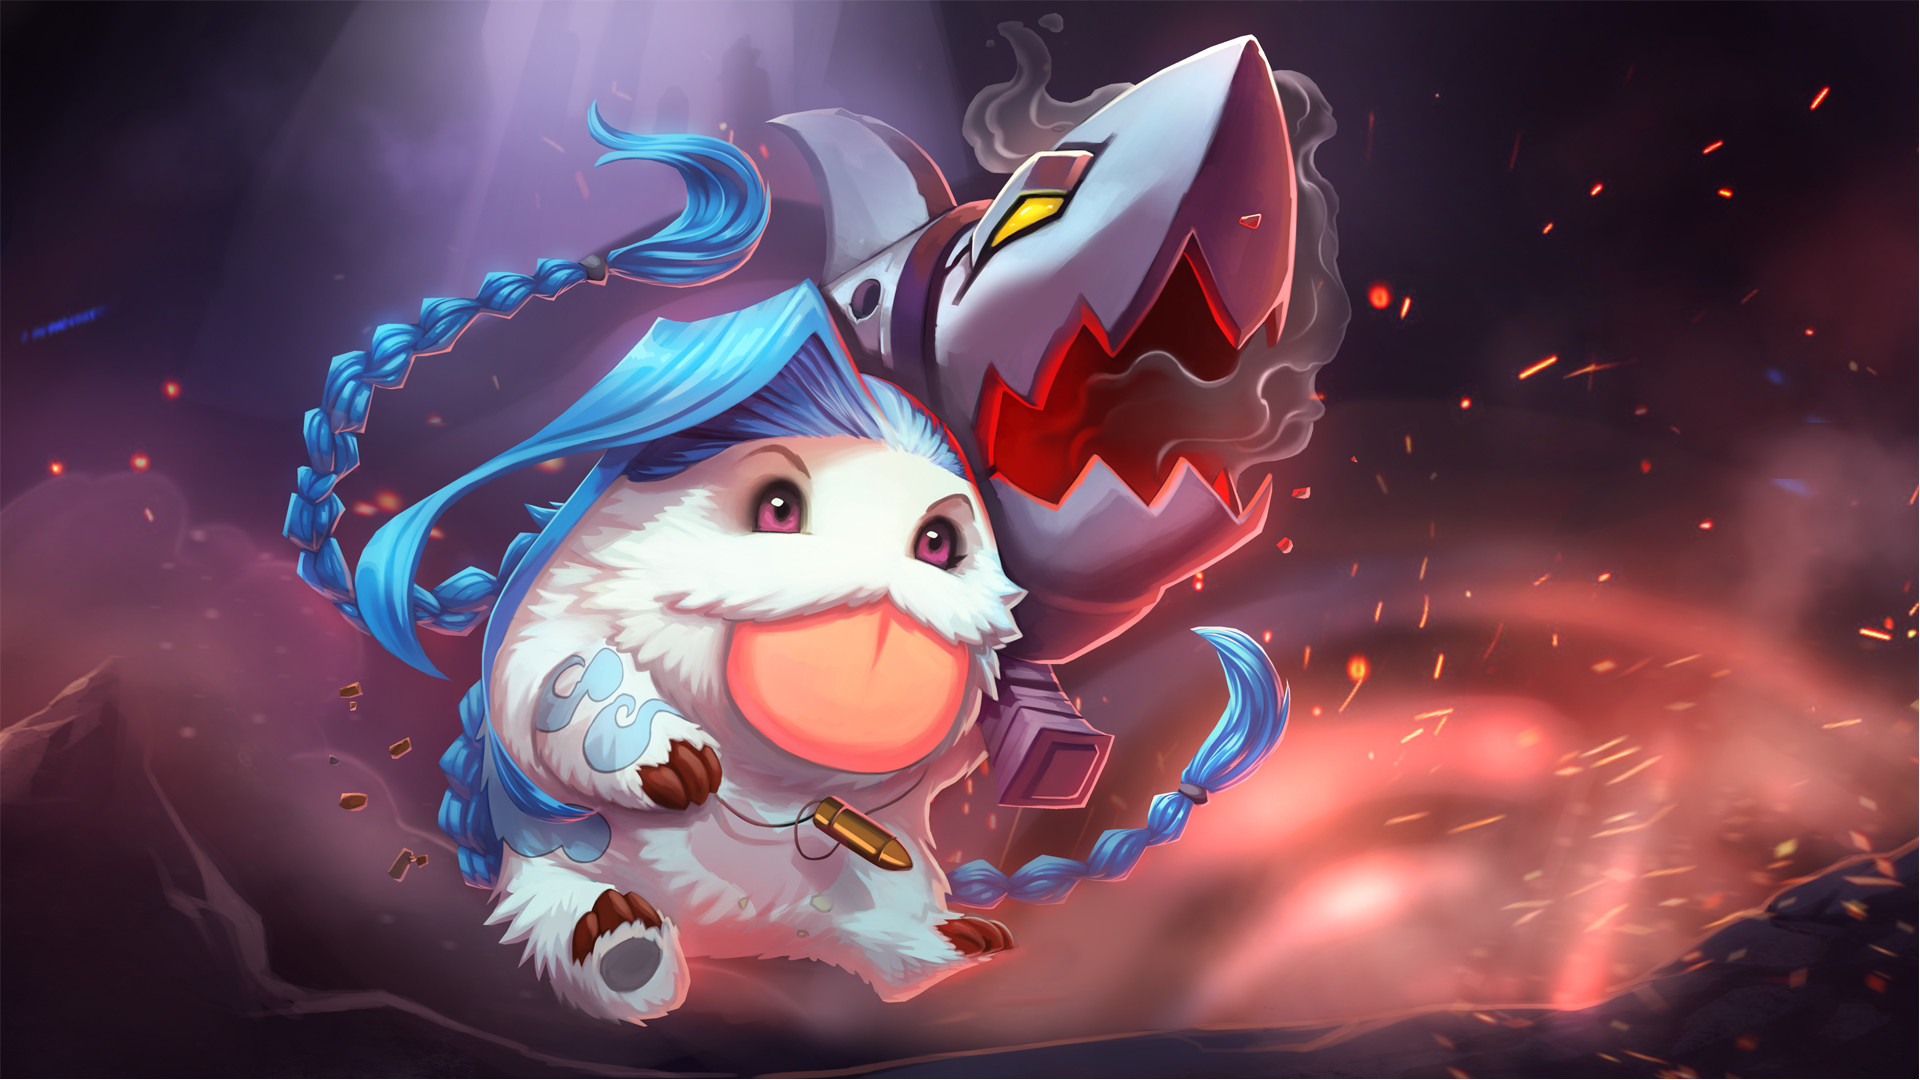 1920x1080 League of Legends images Poro Jinx HD wallpaper and background photos